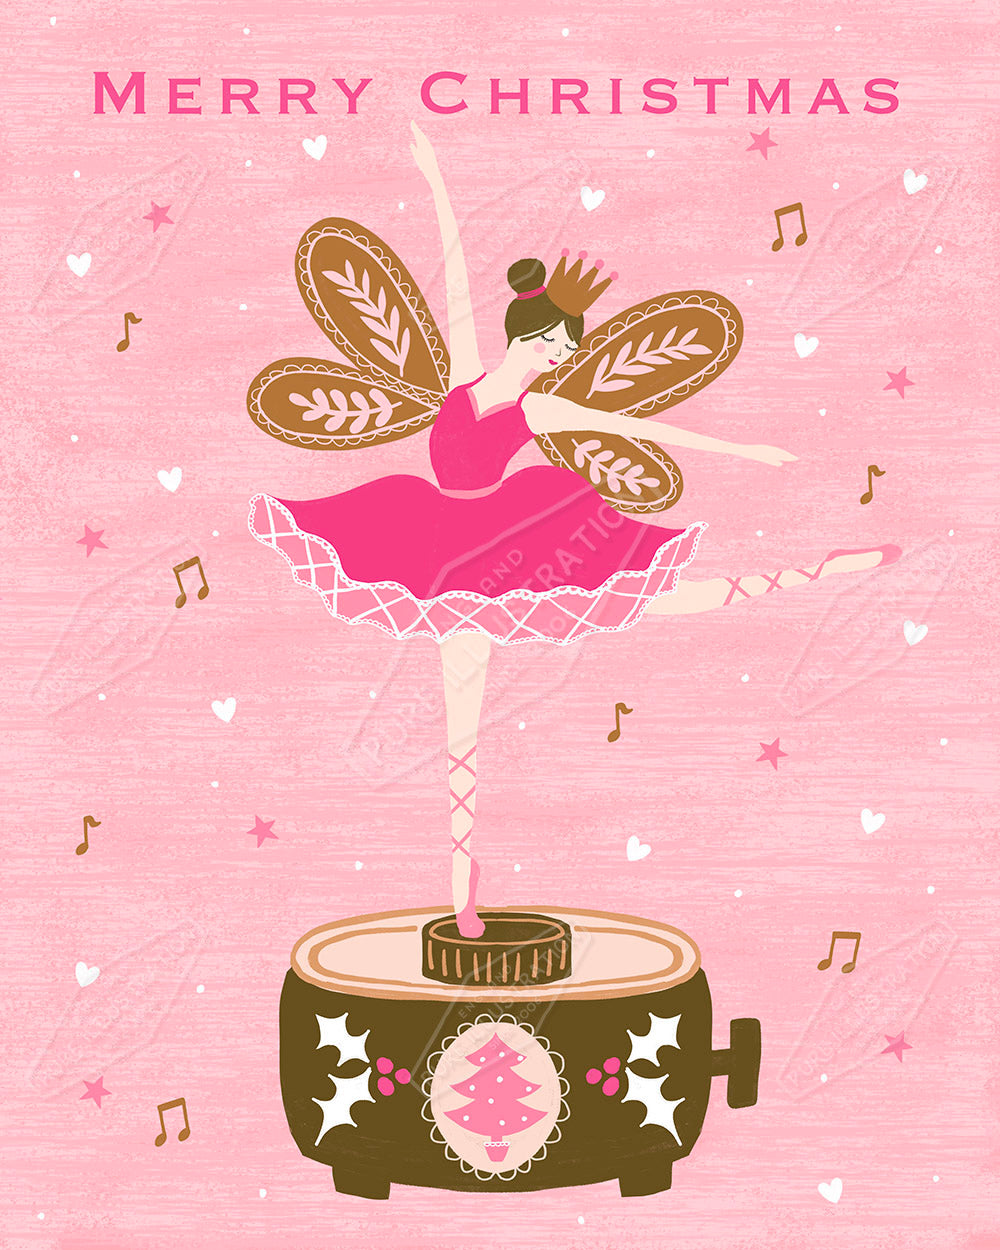 Ballerina Christmas Design by Sian Summerhayes for Pure Art Licensing & Surface Design Agency